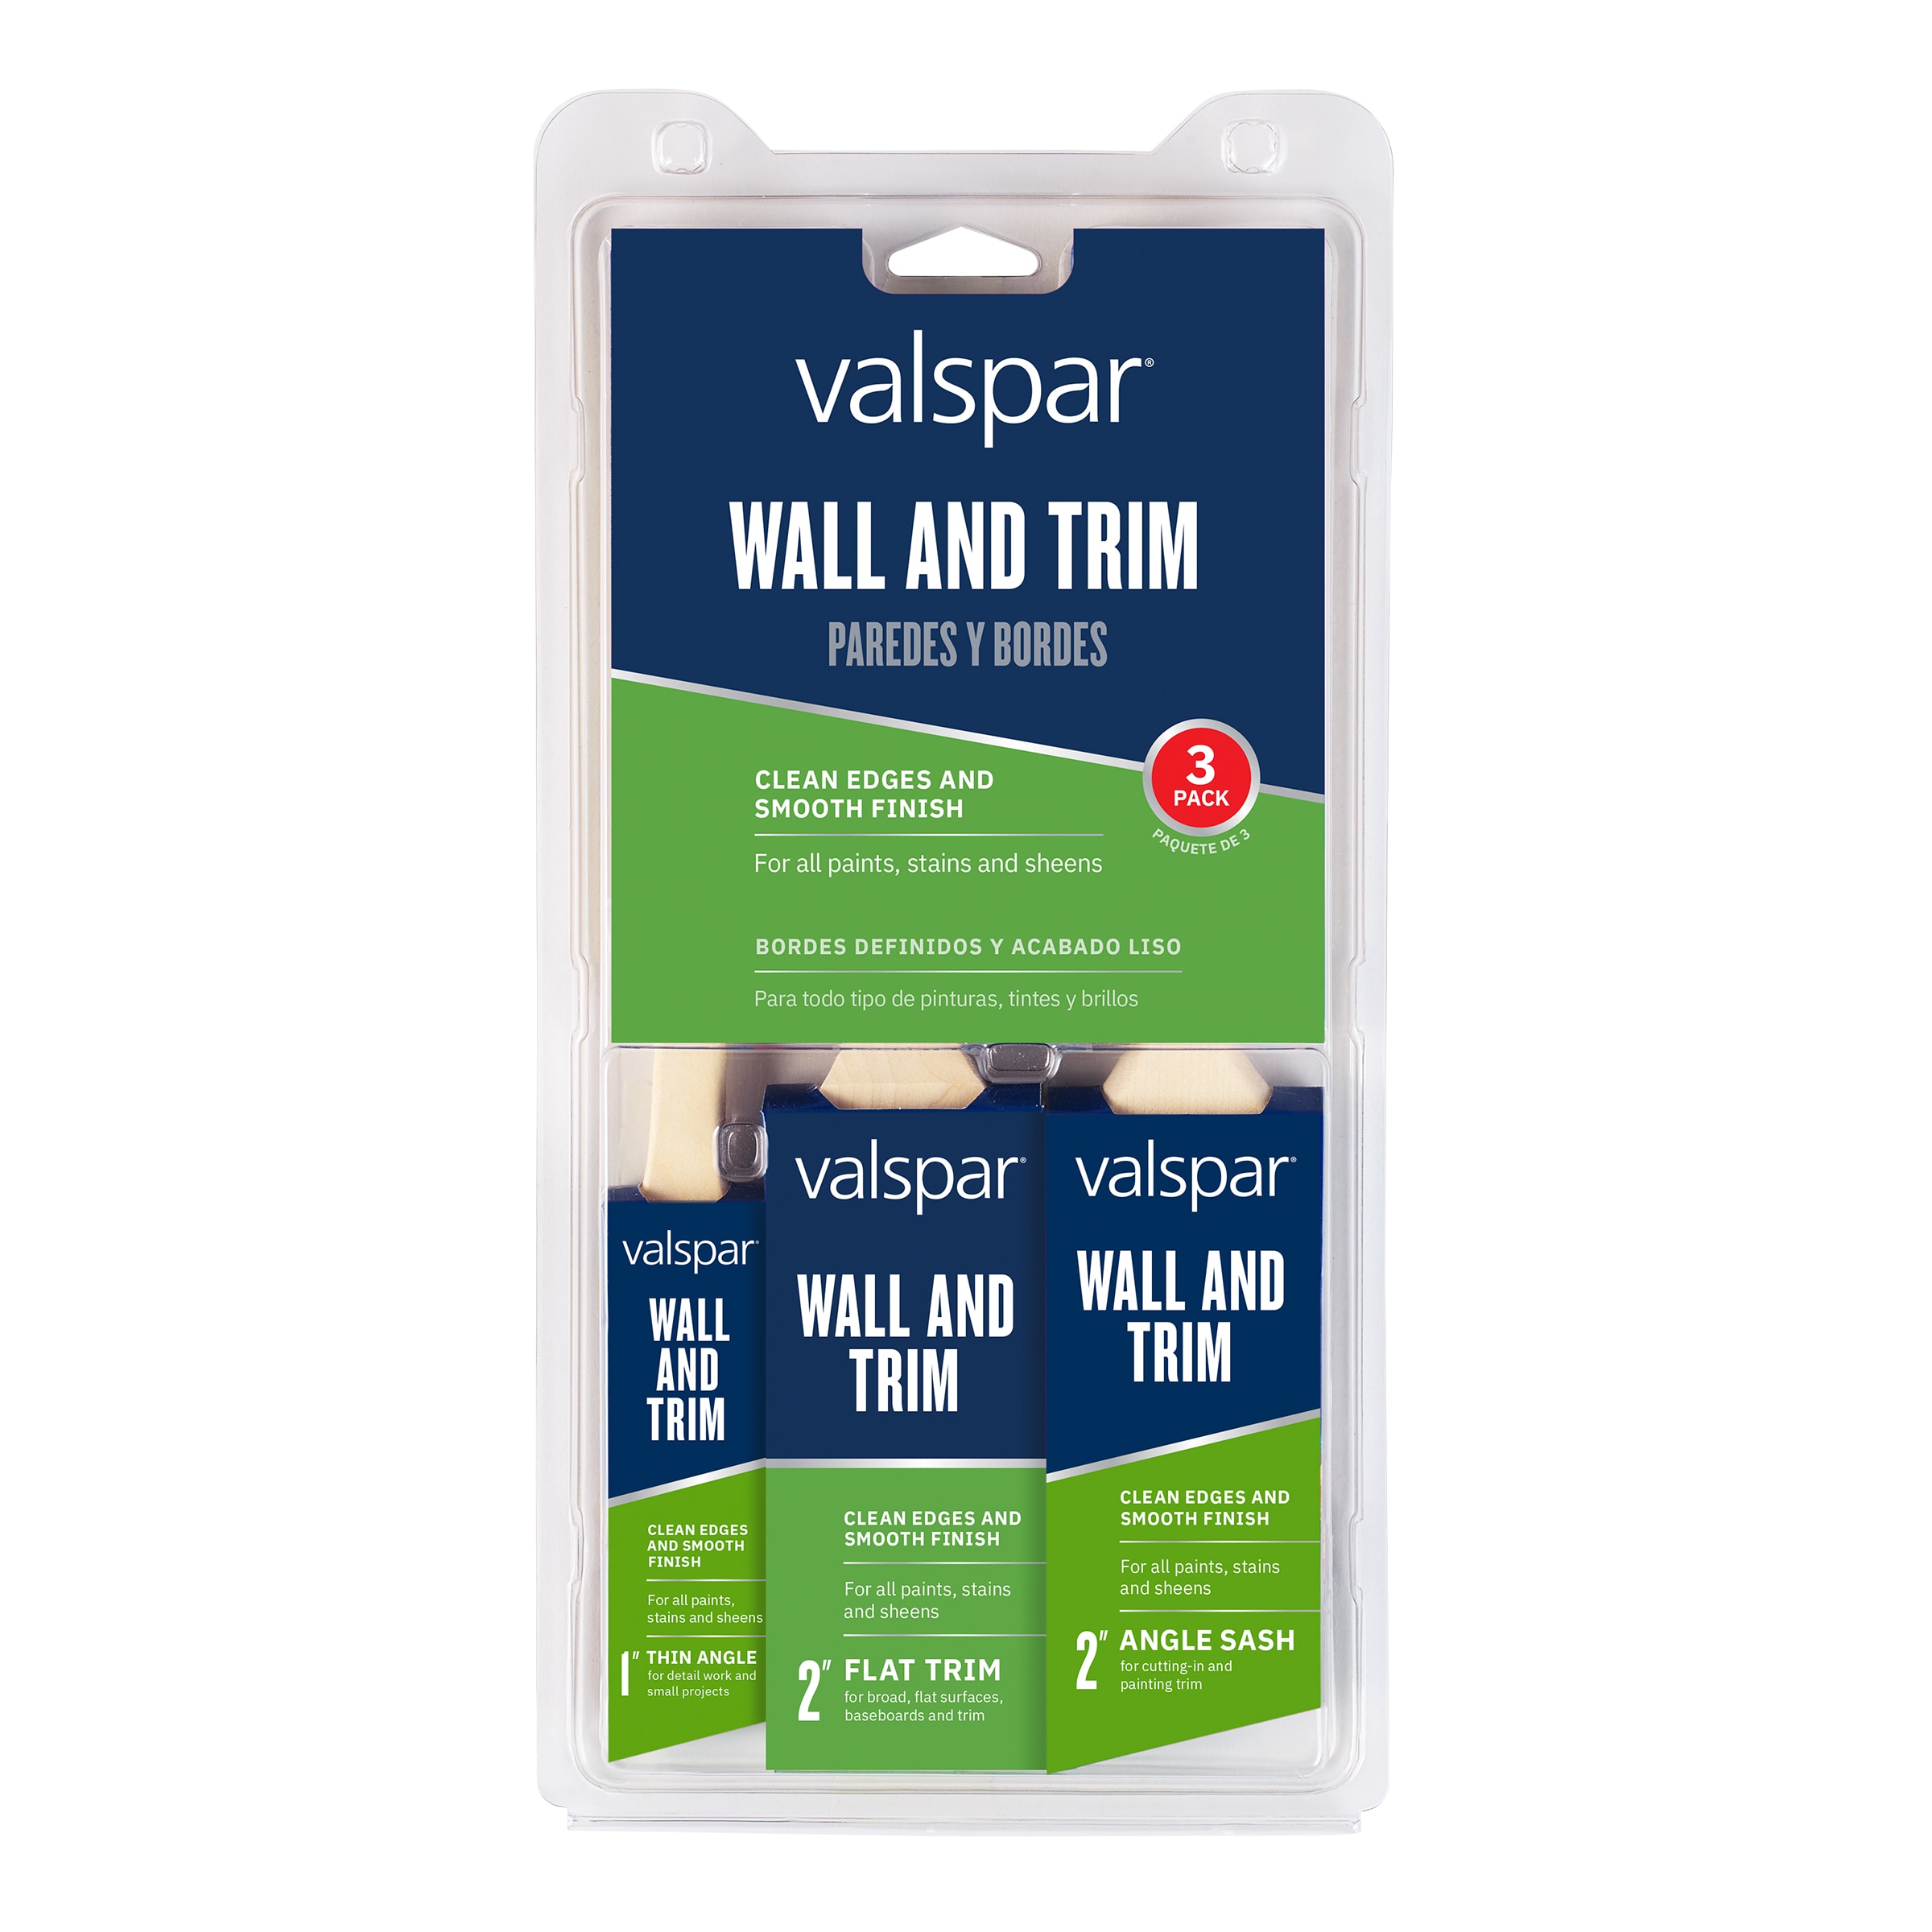 3-Count Valspar Wall & Trim Paint Brush Set (Variety Pack) $10 at Lowe's w/ Free Delivery